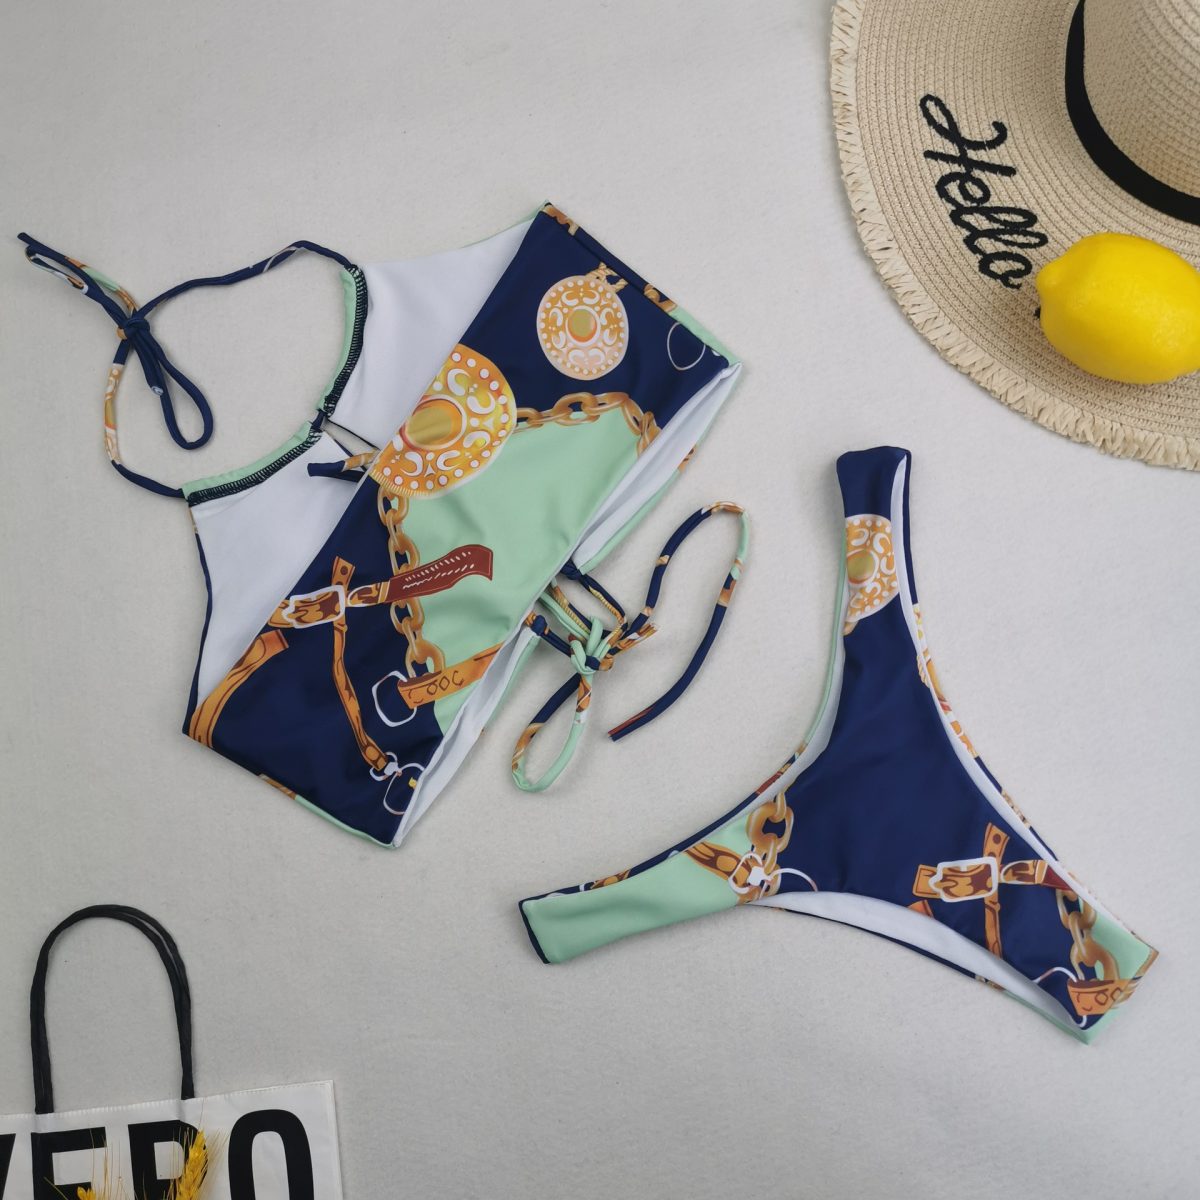 Three Piece High Waist Printed Swimsuit in Swimsuits